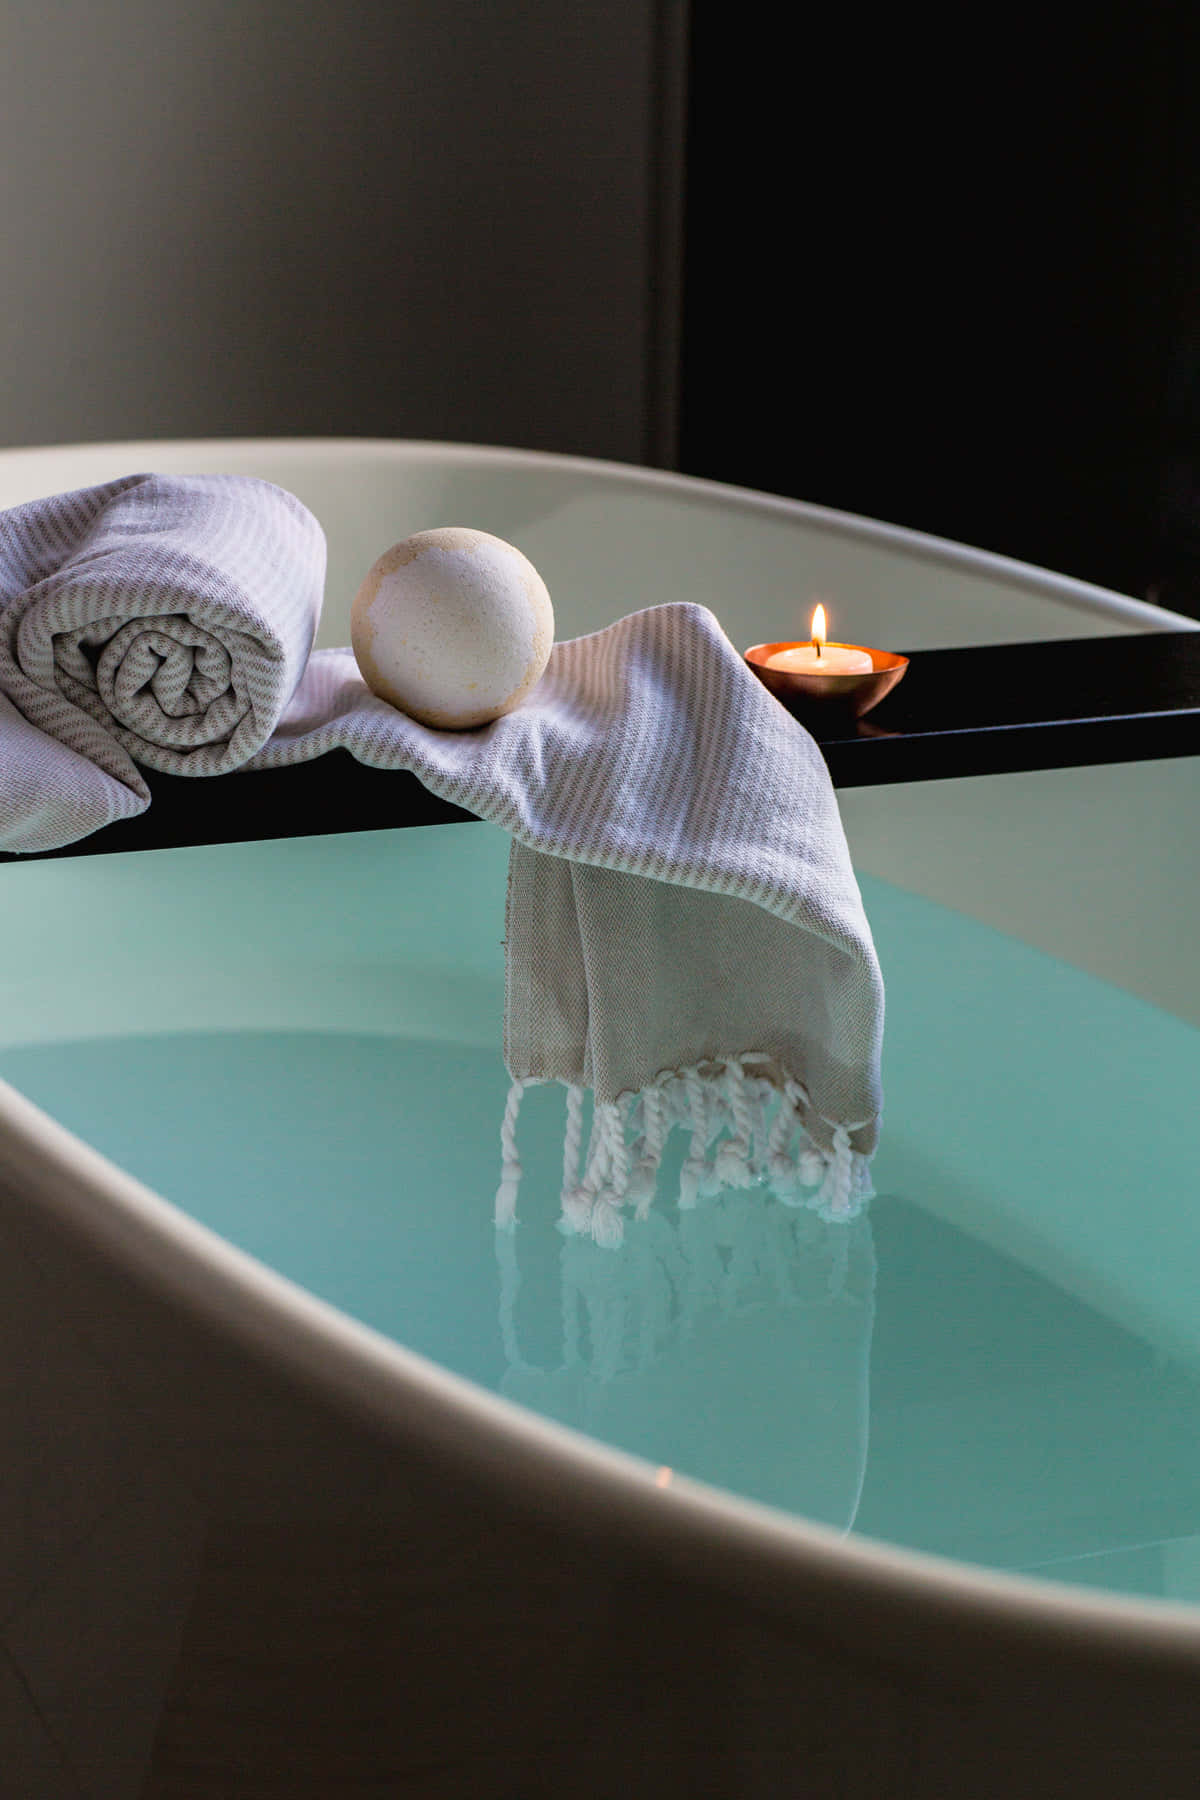 Spa Towel And Egg Picture